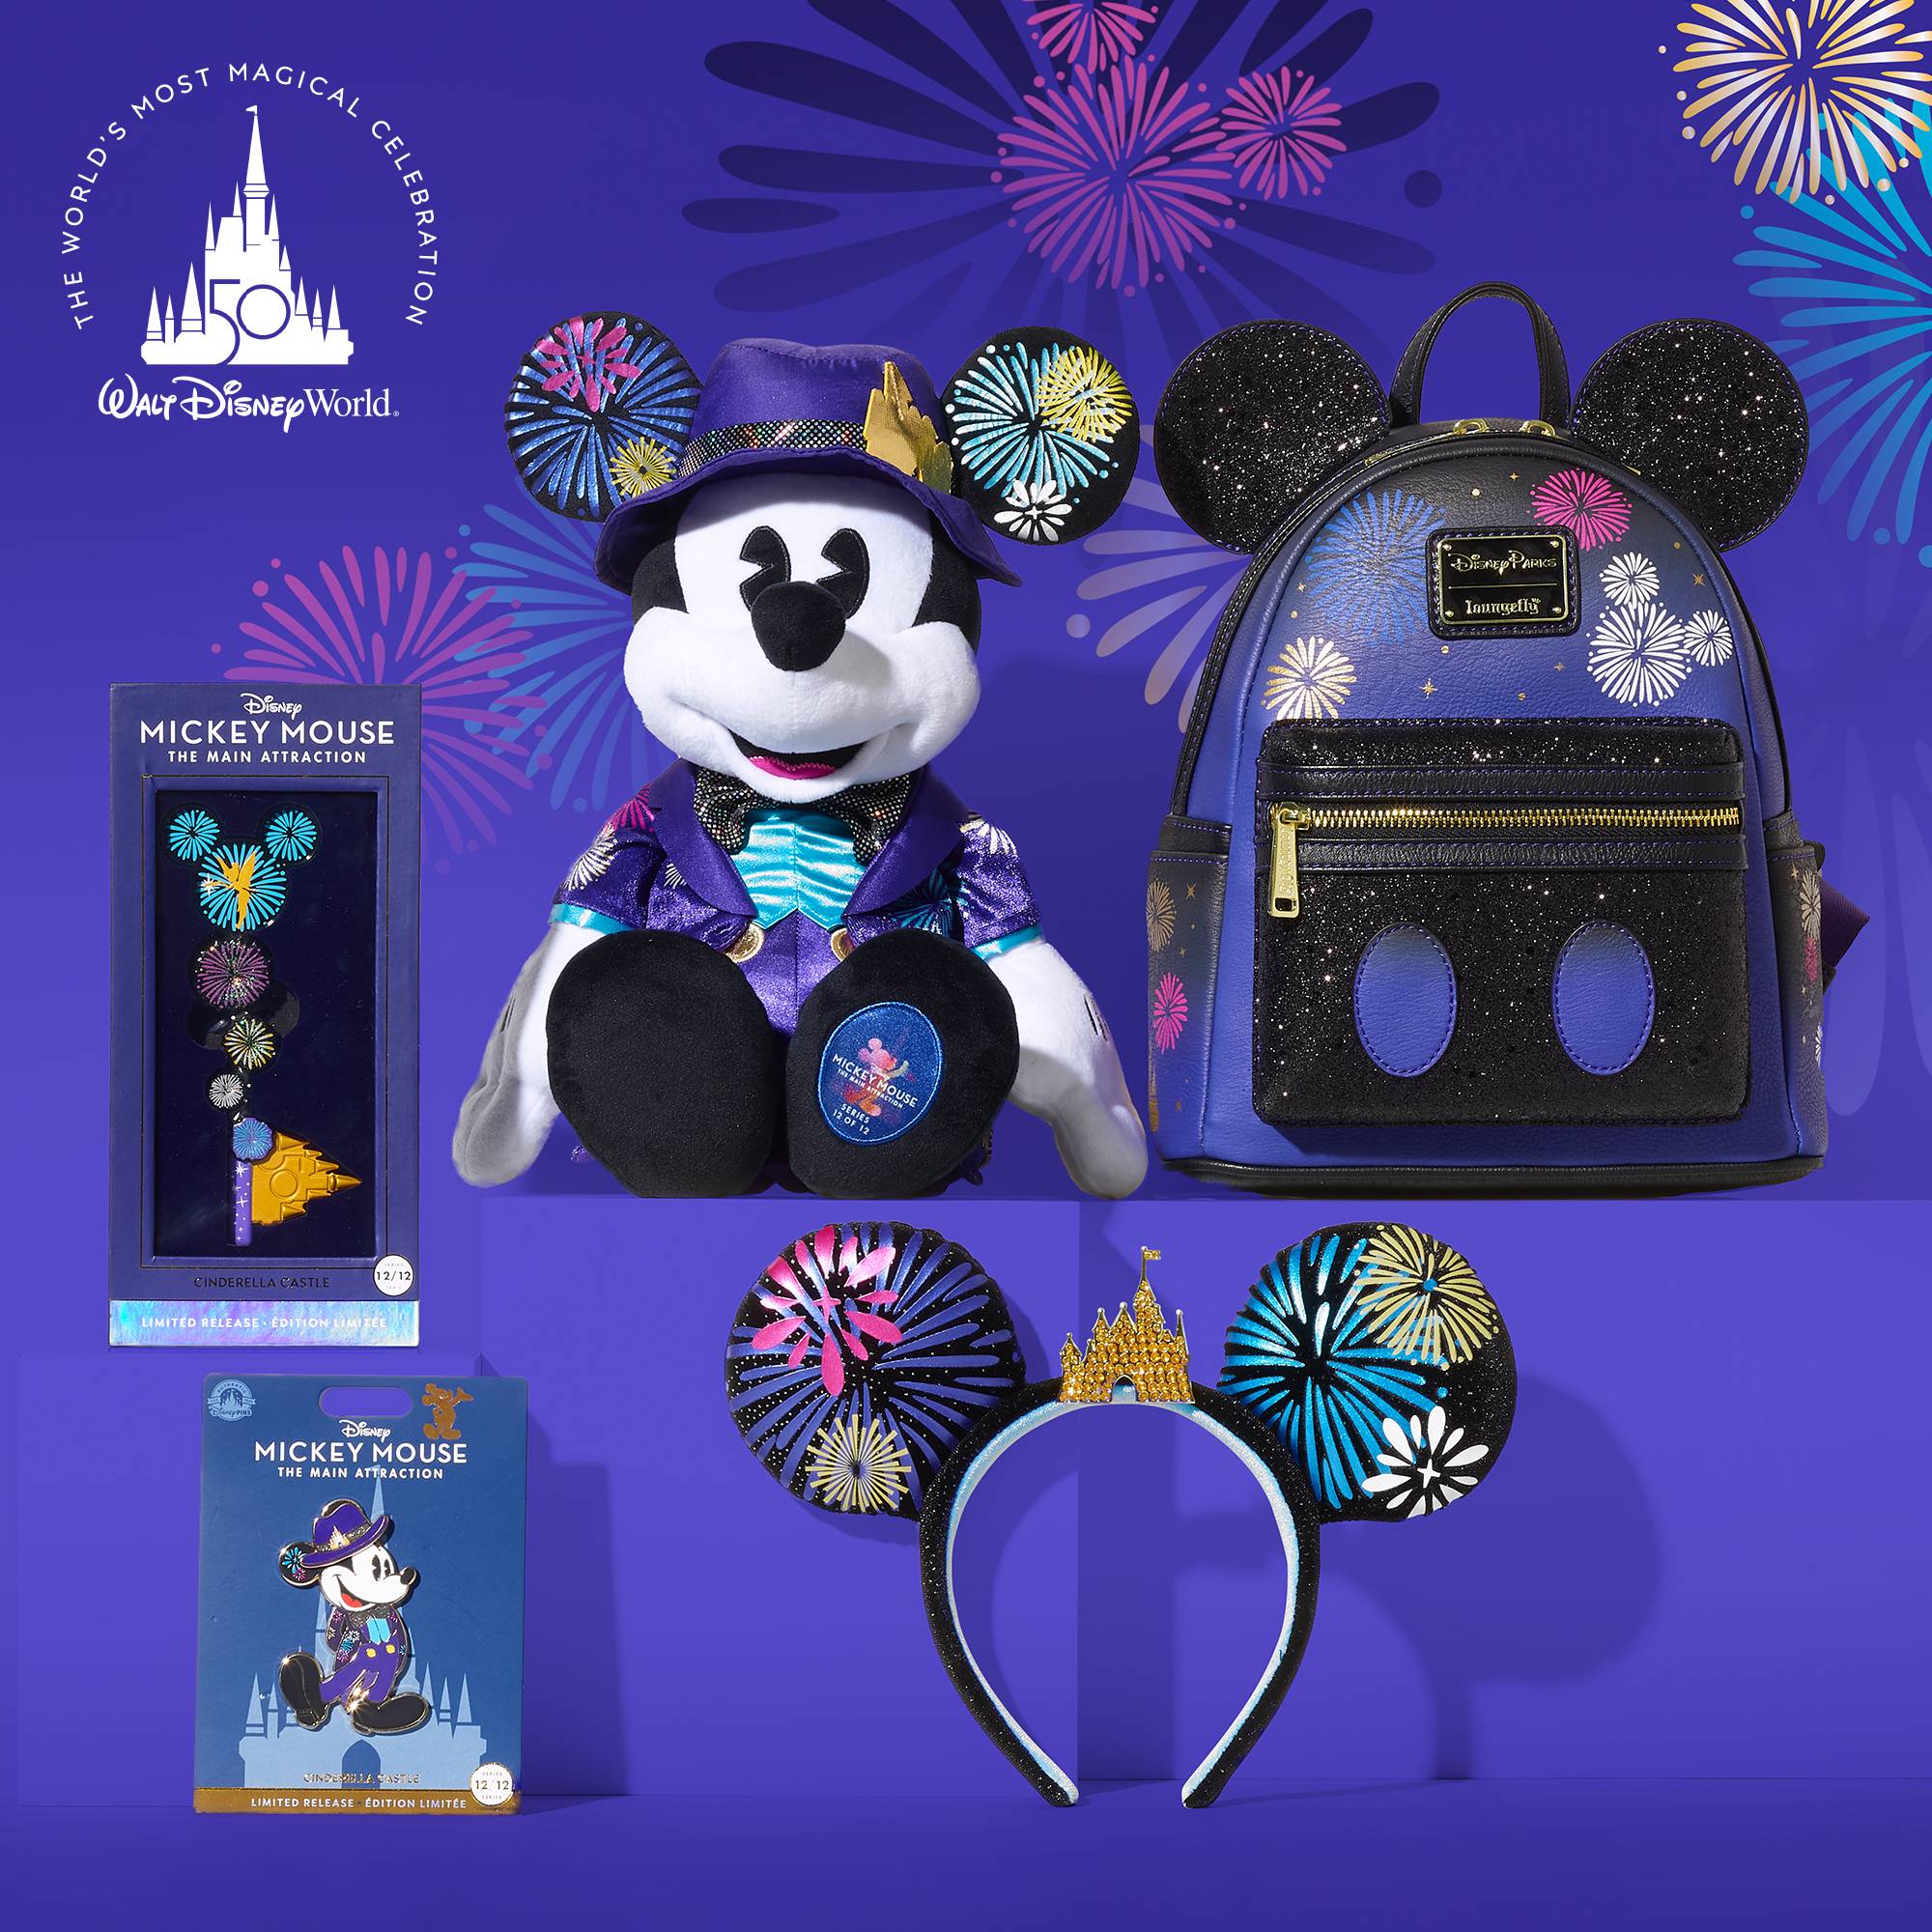 First look at the Walt Disney World Resort 50th Anniversary Grand Finale merchandise collection